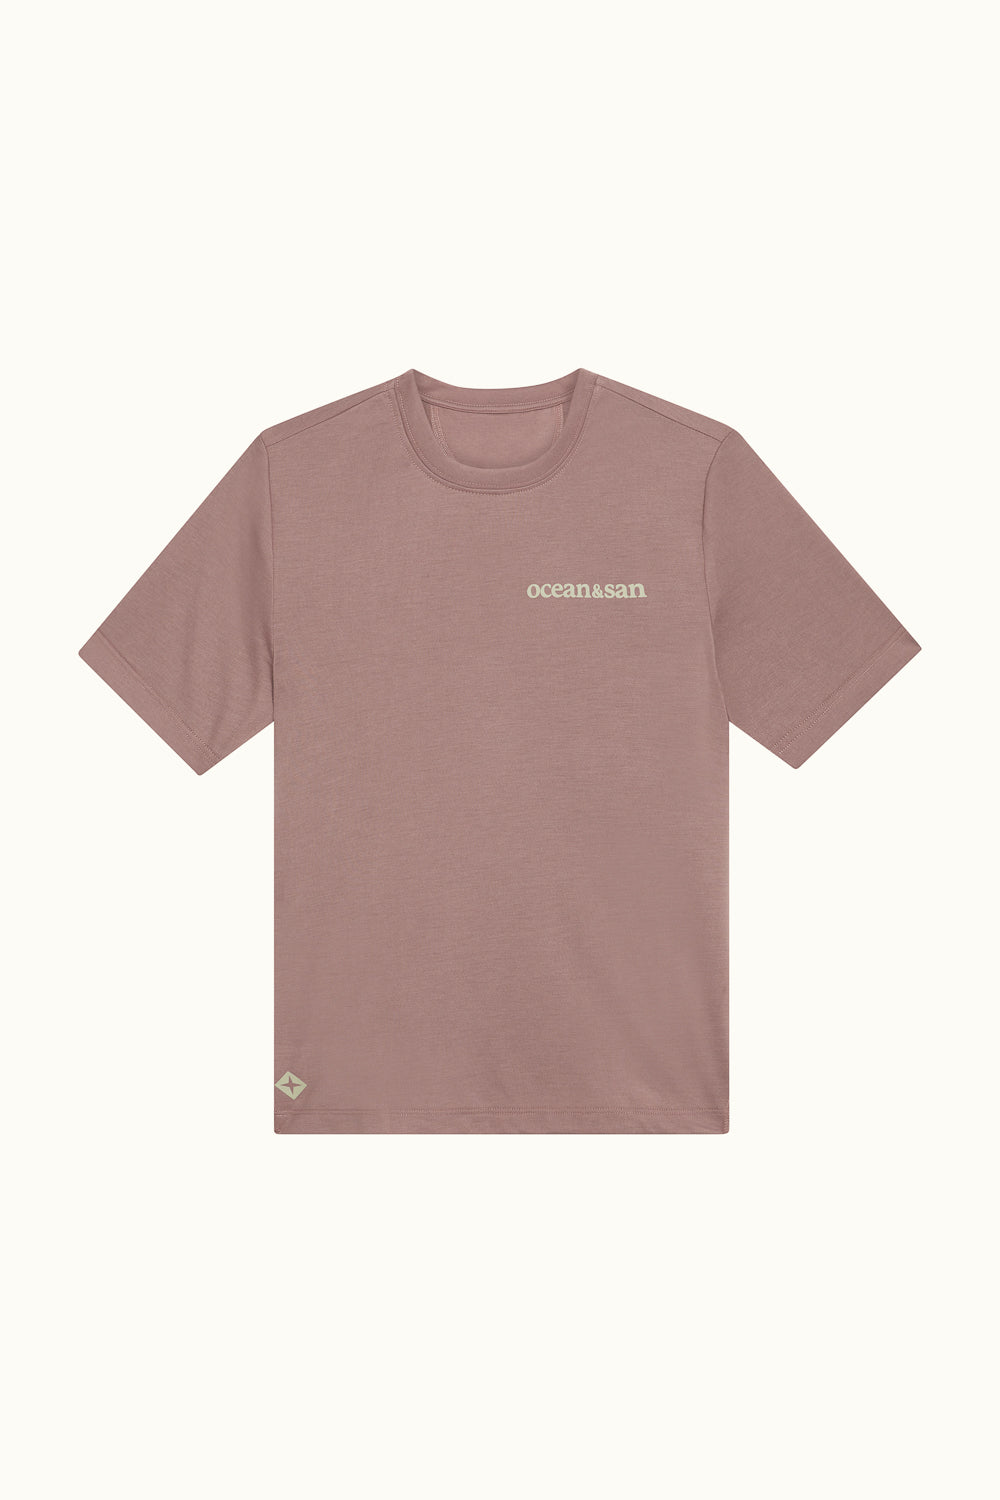 Heavy Every Day Tee - Washed Mauve, mnml